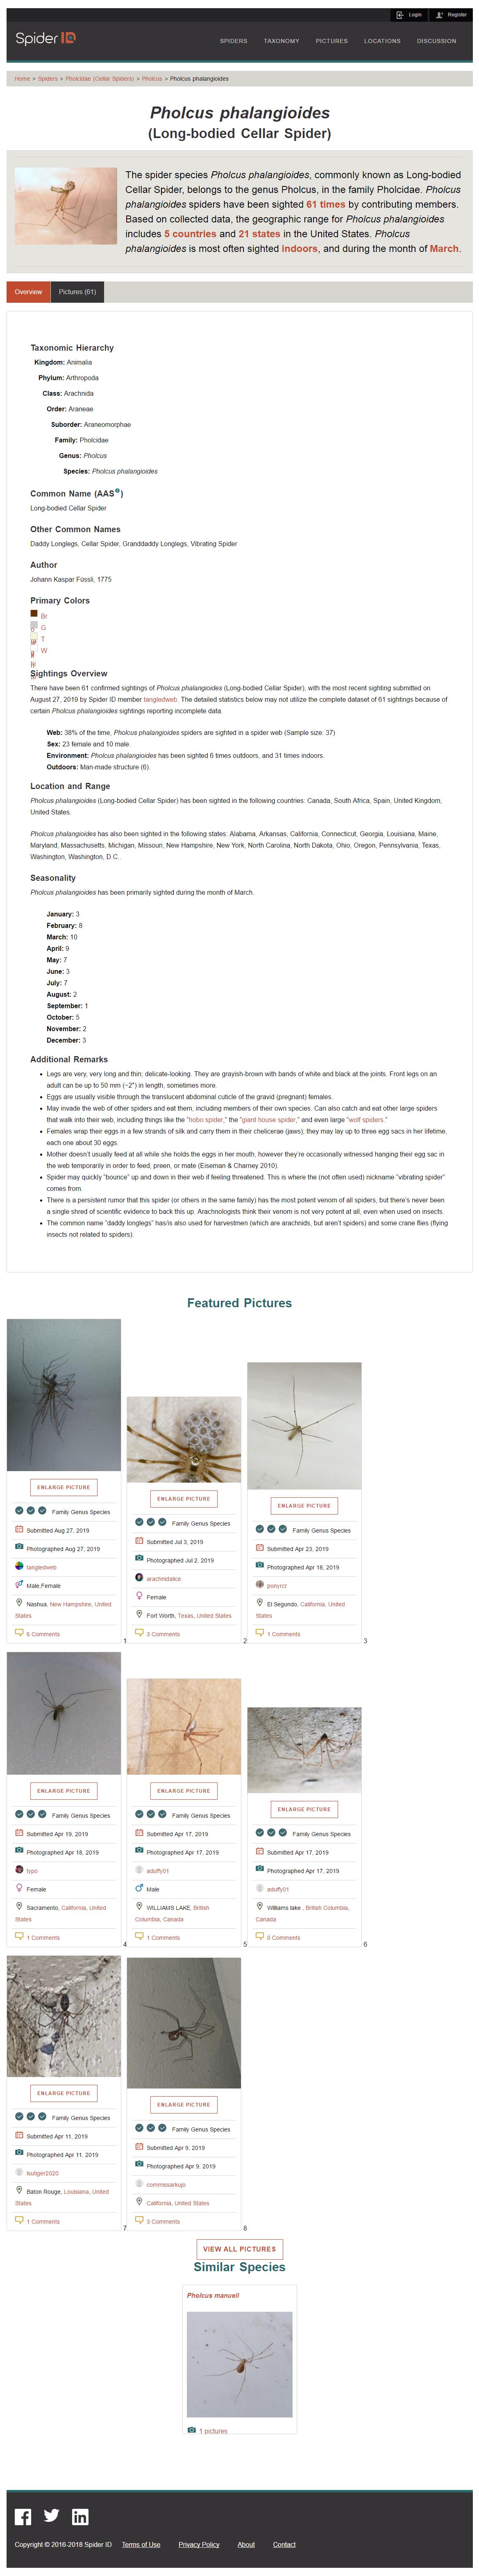 Pholcus phalangioides (Long-bodied Cellar Spider) - Spider Identification & Pi.jpg